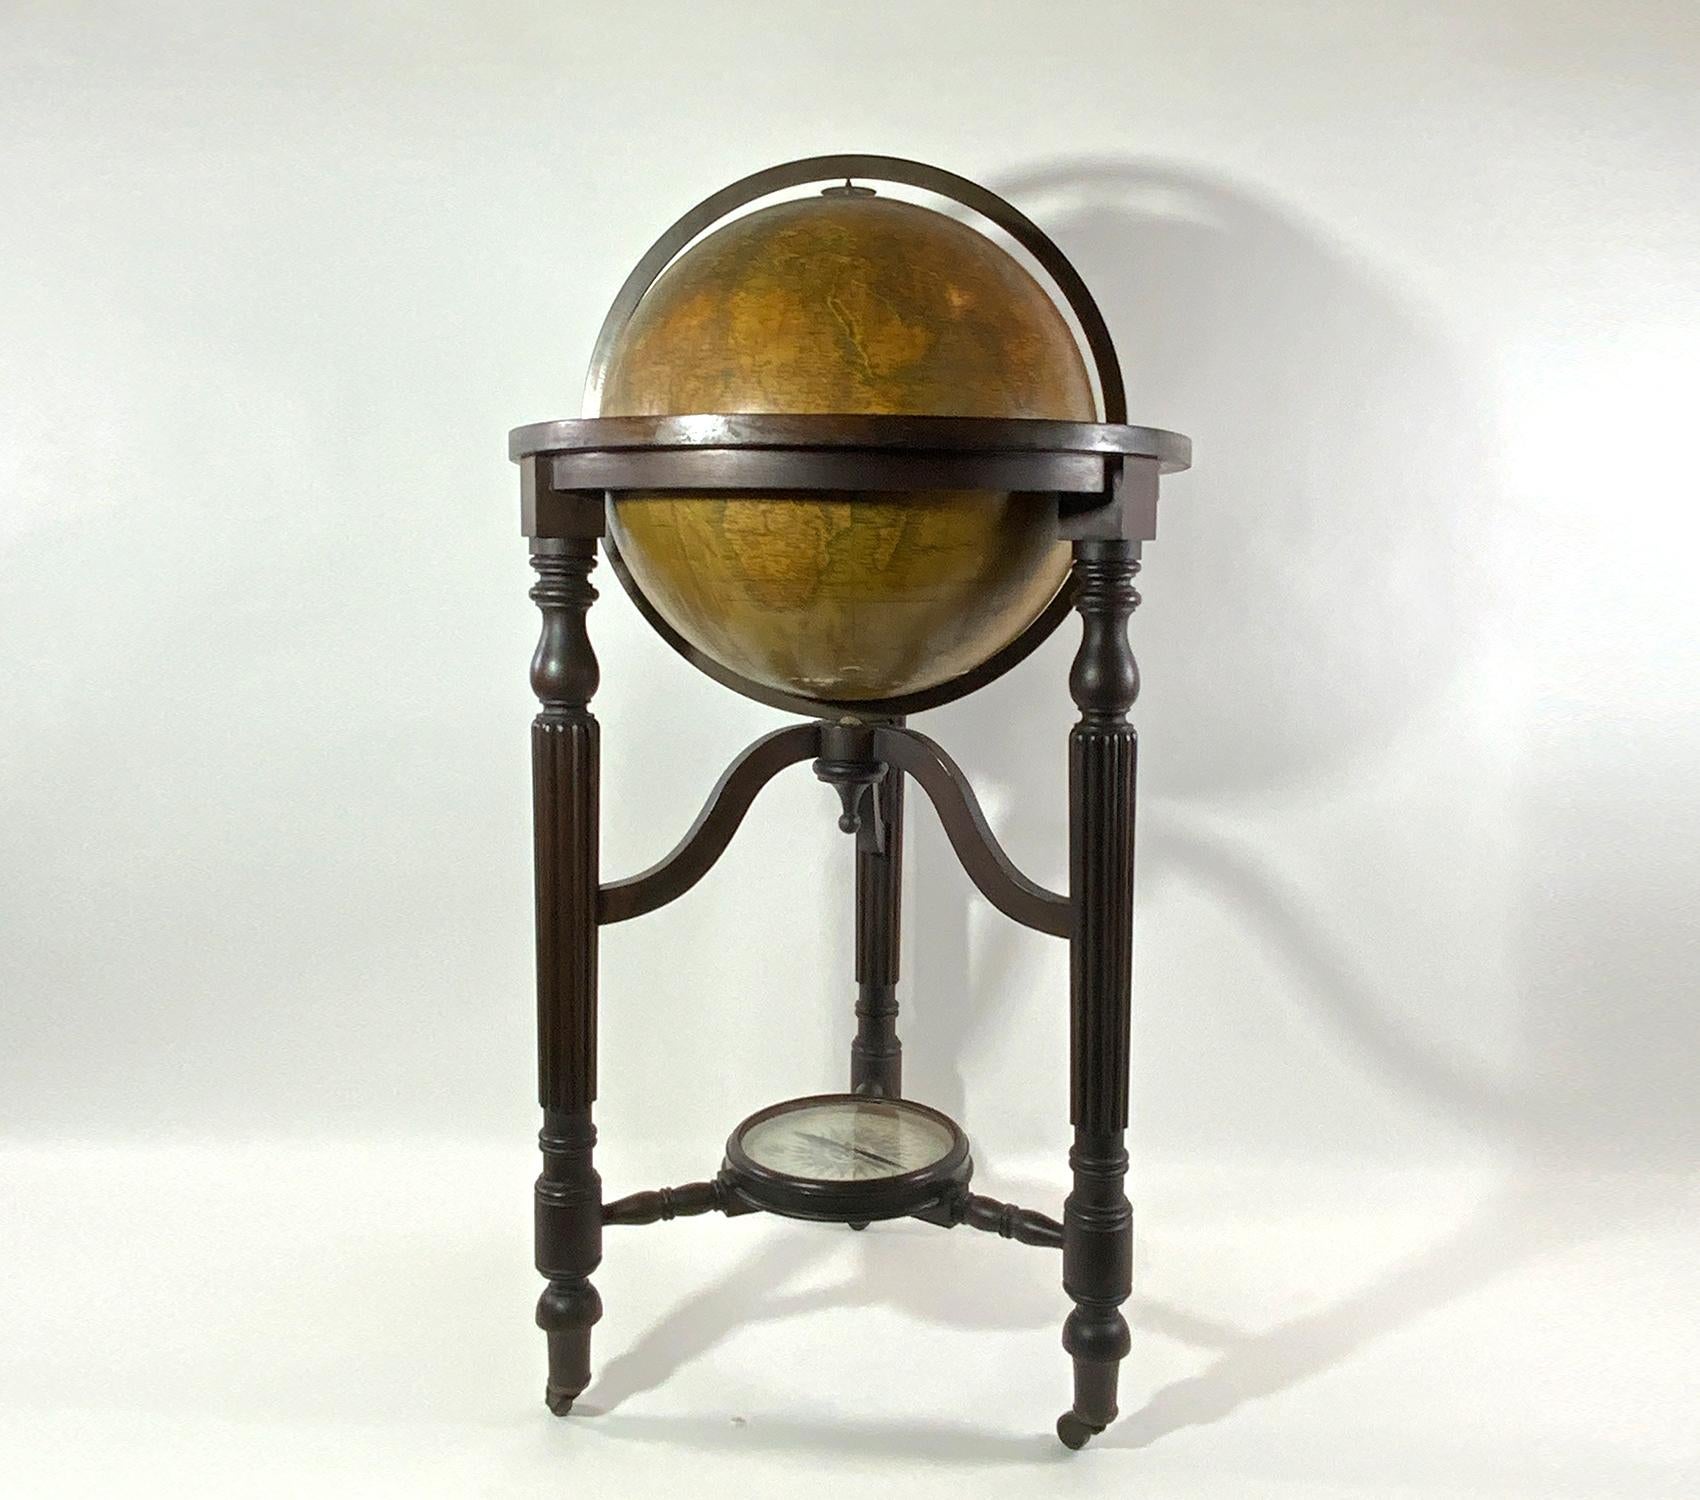 Rare library globe by Philipps Fleet Street. Late 19th century. Mounted on a mahogany stand with three receded and turned legs and castors. Base has a working compass. Globe itself shows areas of wear and discoloration with some loss. 45